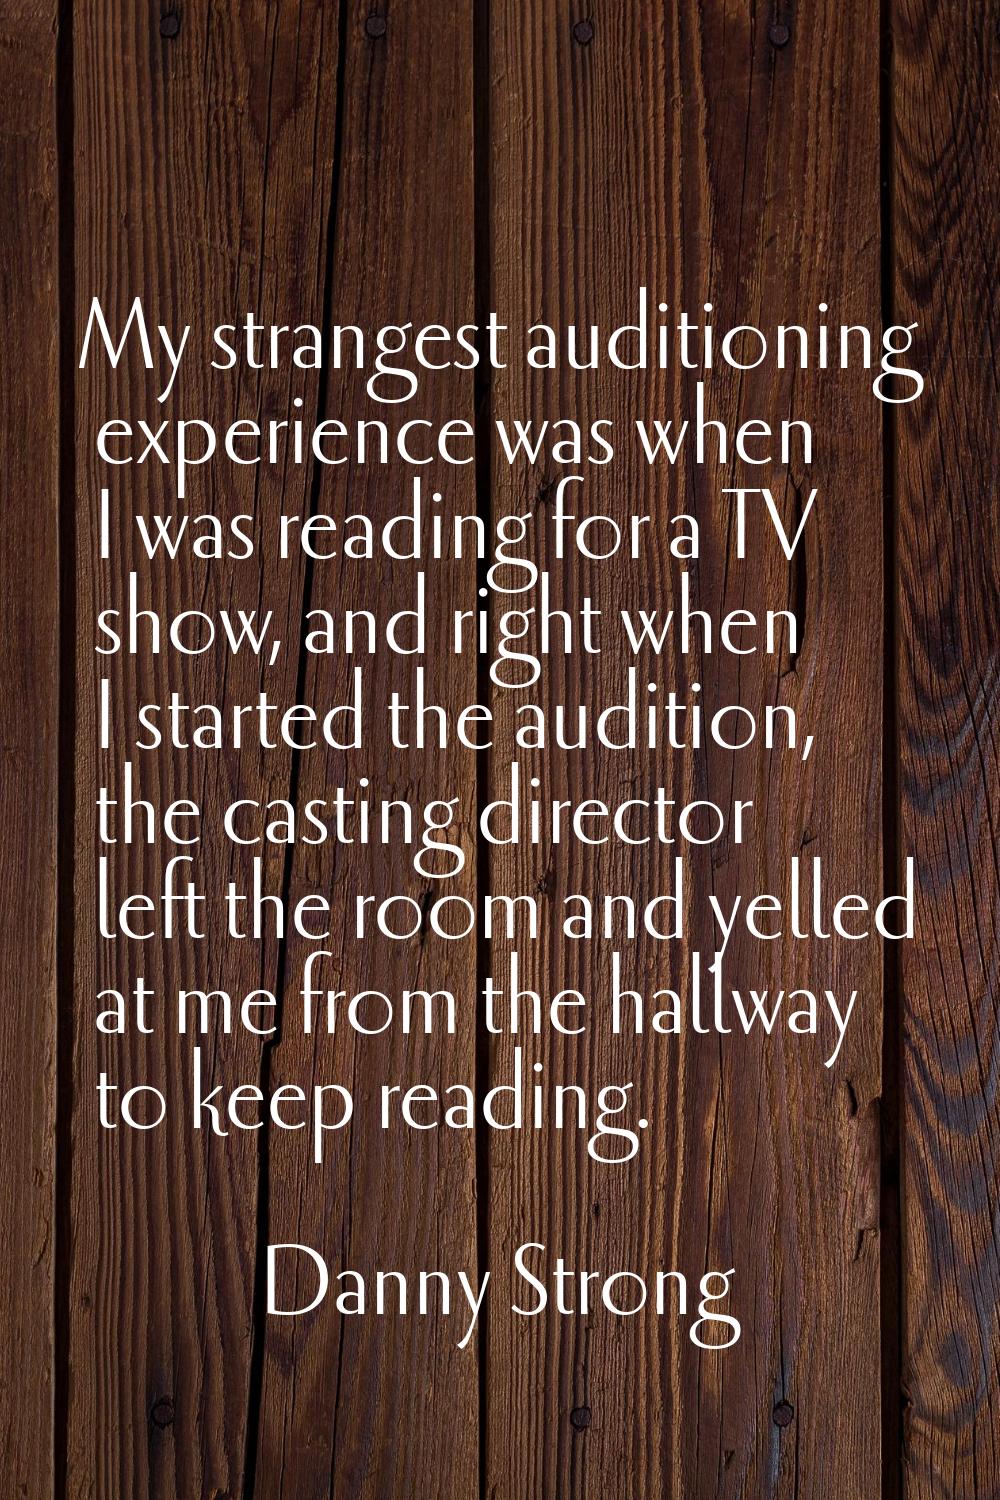 My strangest auditioning experience was when I was reading for a TV show, and right when I started 